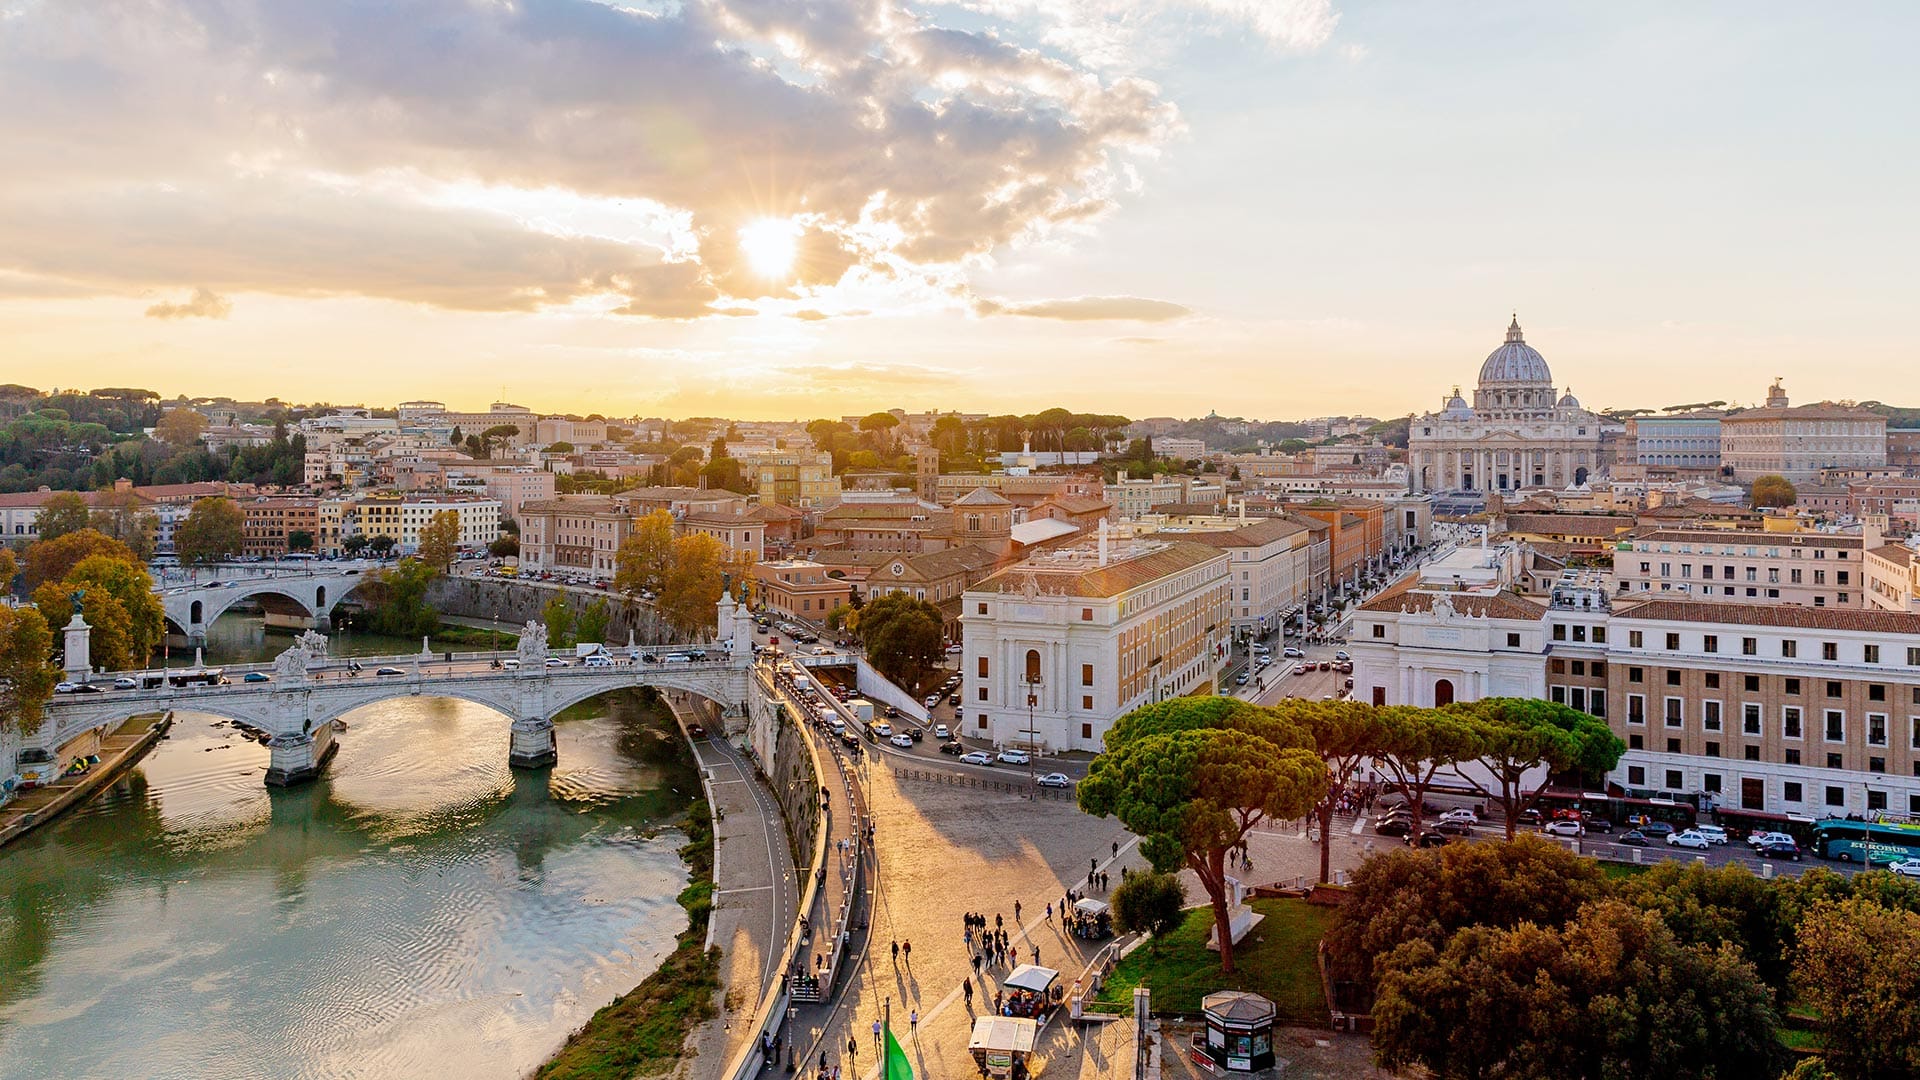 Enjoy 3 Days in Rome, Italy, from the Ancient Ruins to the Hippest Haunts (Rome)